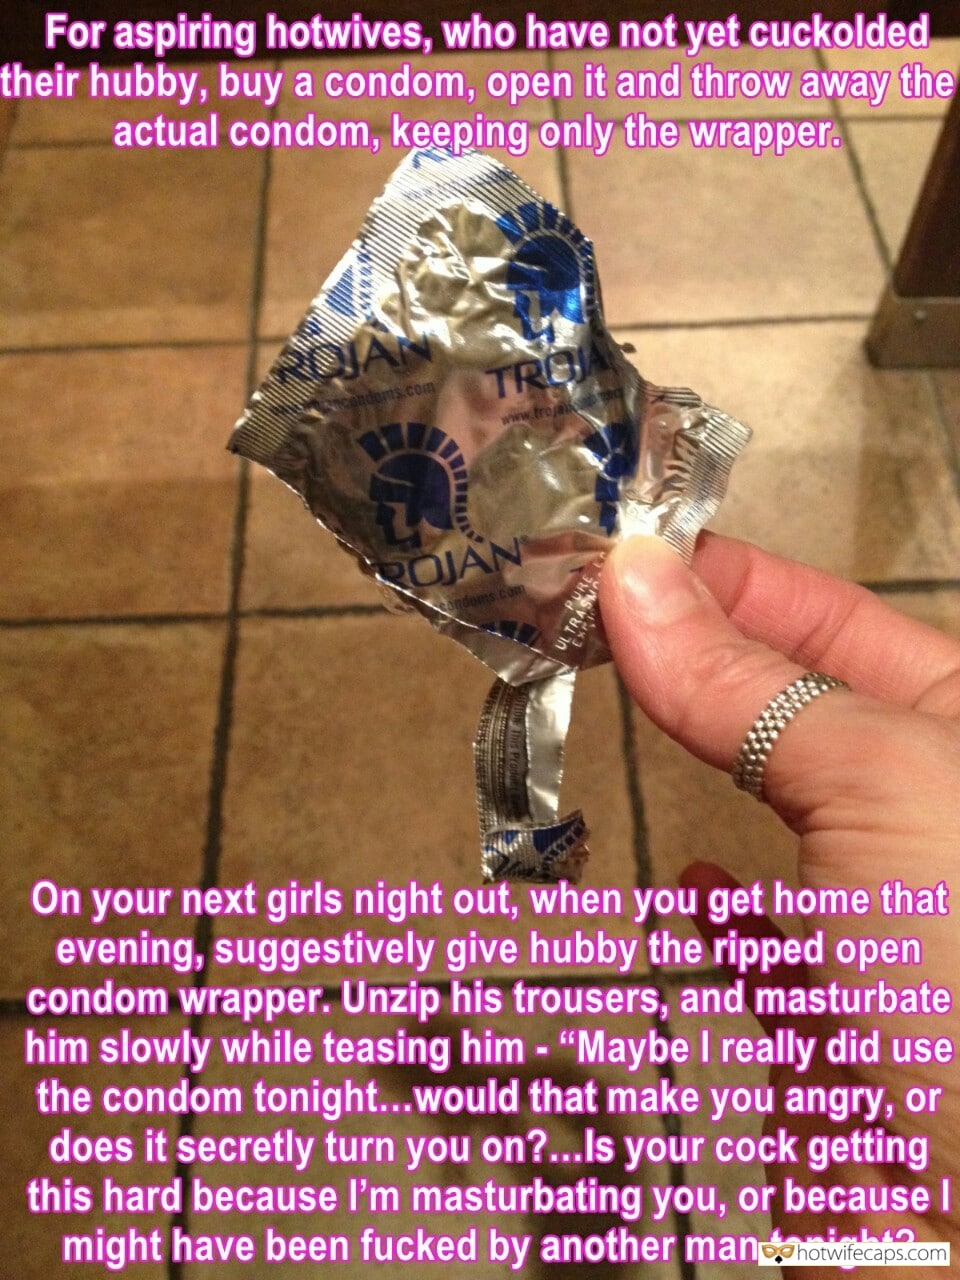 Sexy Memes hotwife caption: For aspiring hotwives, who have not yet cuckolded. their hubby, buy a condom, open it and throw away the actual condom, keeping only the wrapper. TROA ndoms.com www.troja ROJAN condems.com On your next girls night out, when you get home...